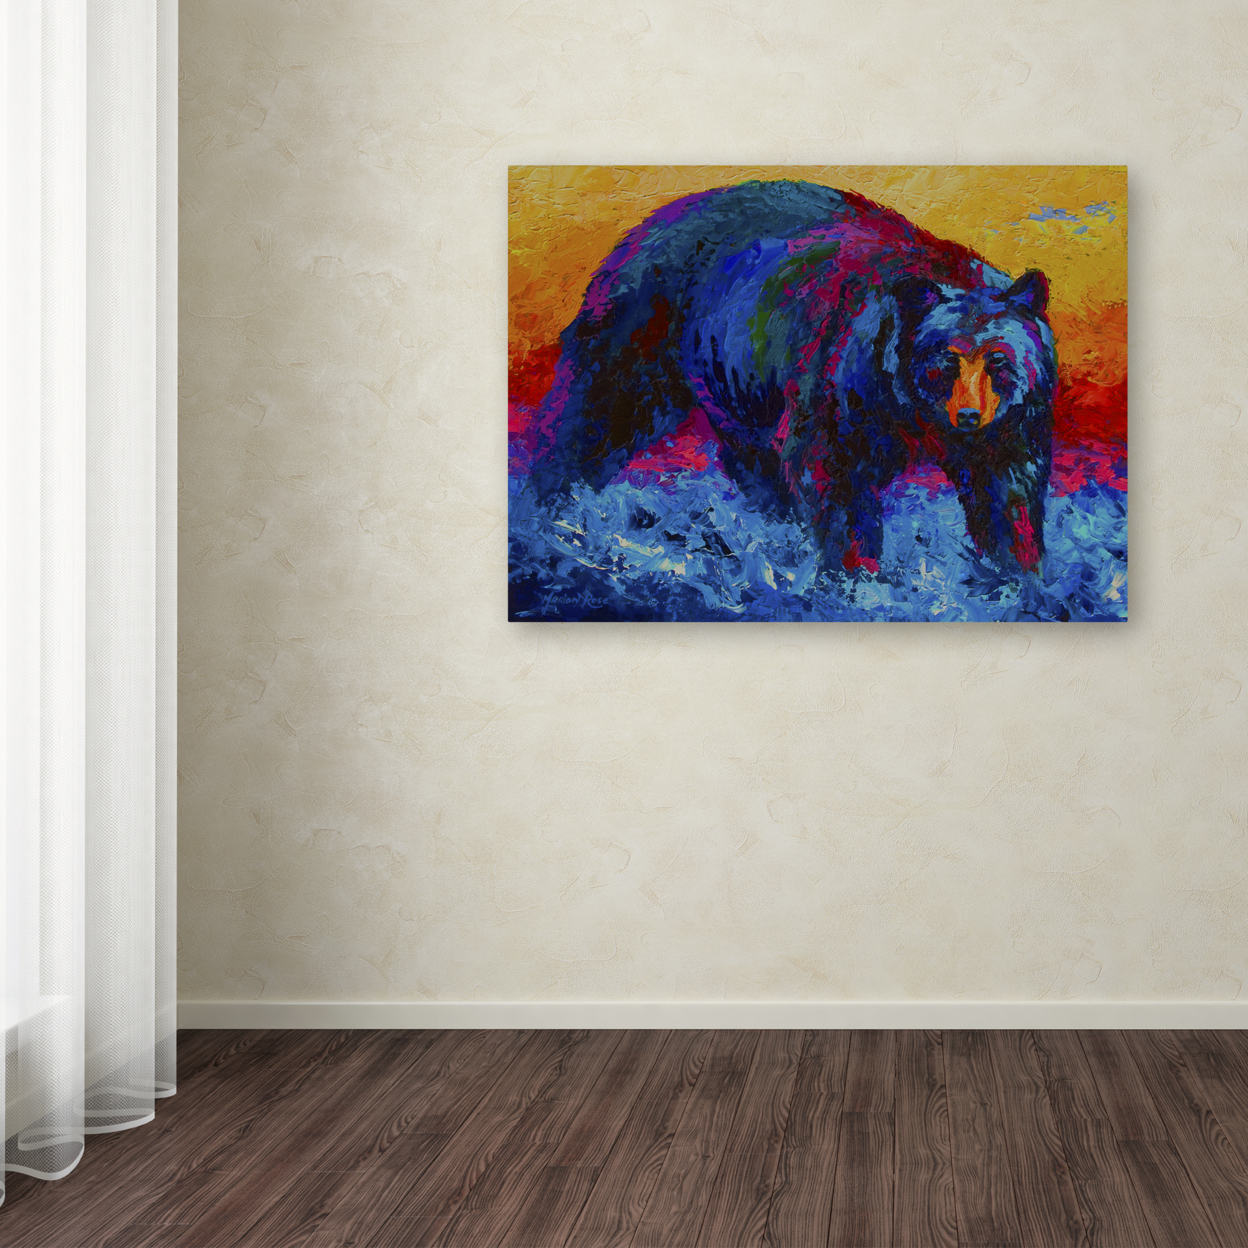 Marion Rose 'Scouting Fish Black Bear' Ready To Hang Canvas Art 24 X 32 Inches Made In USA